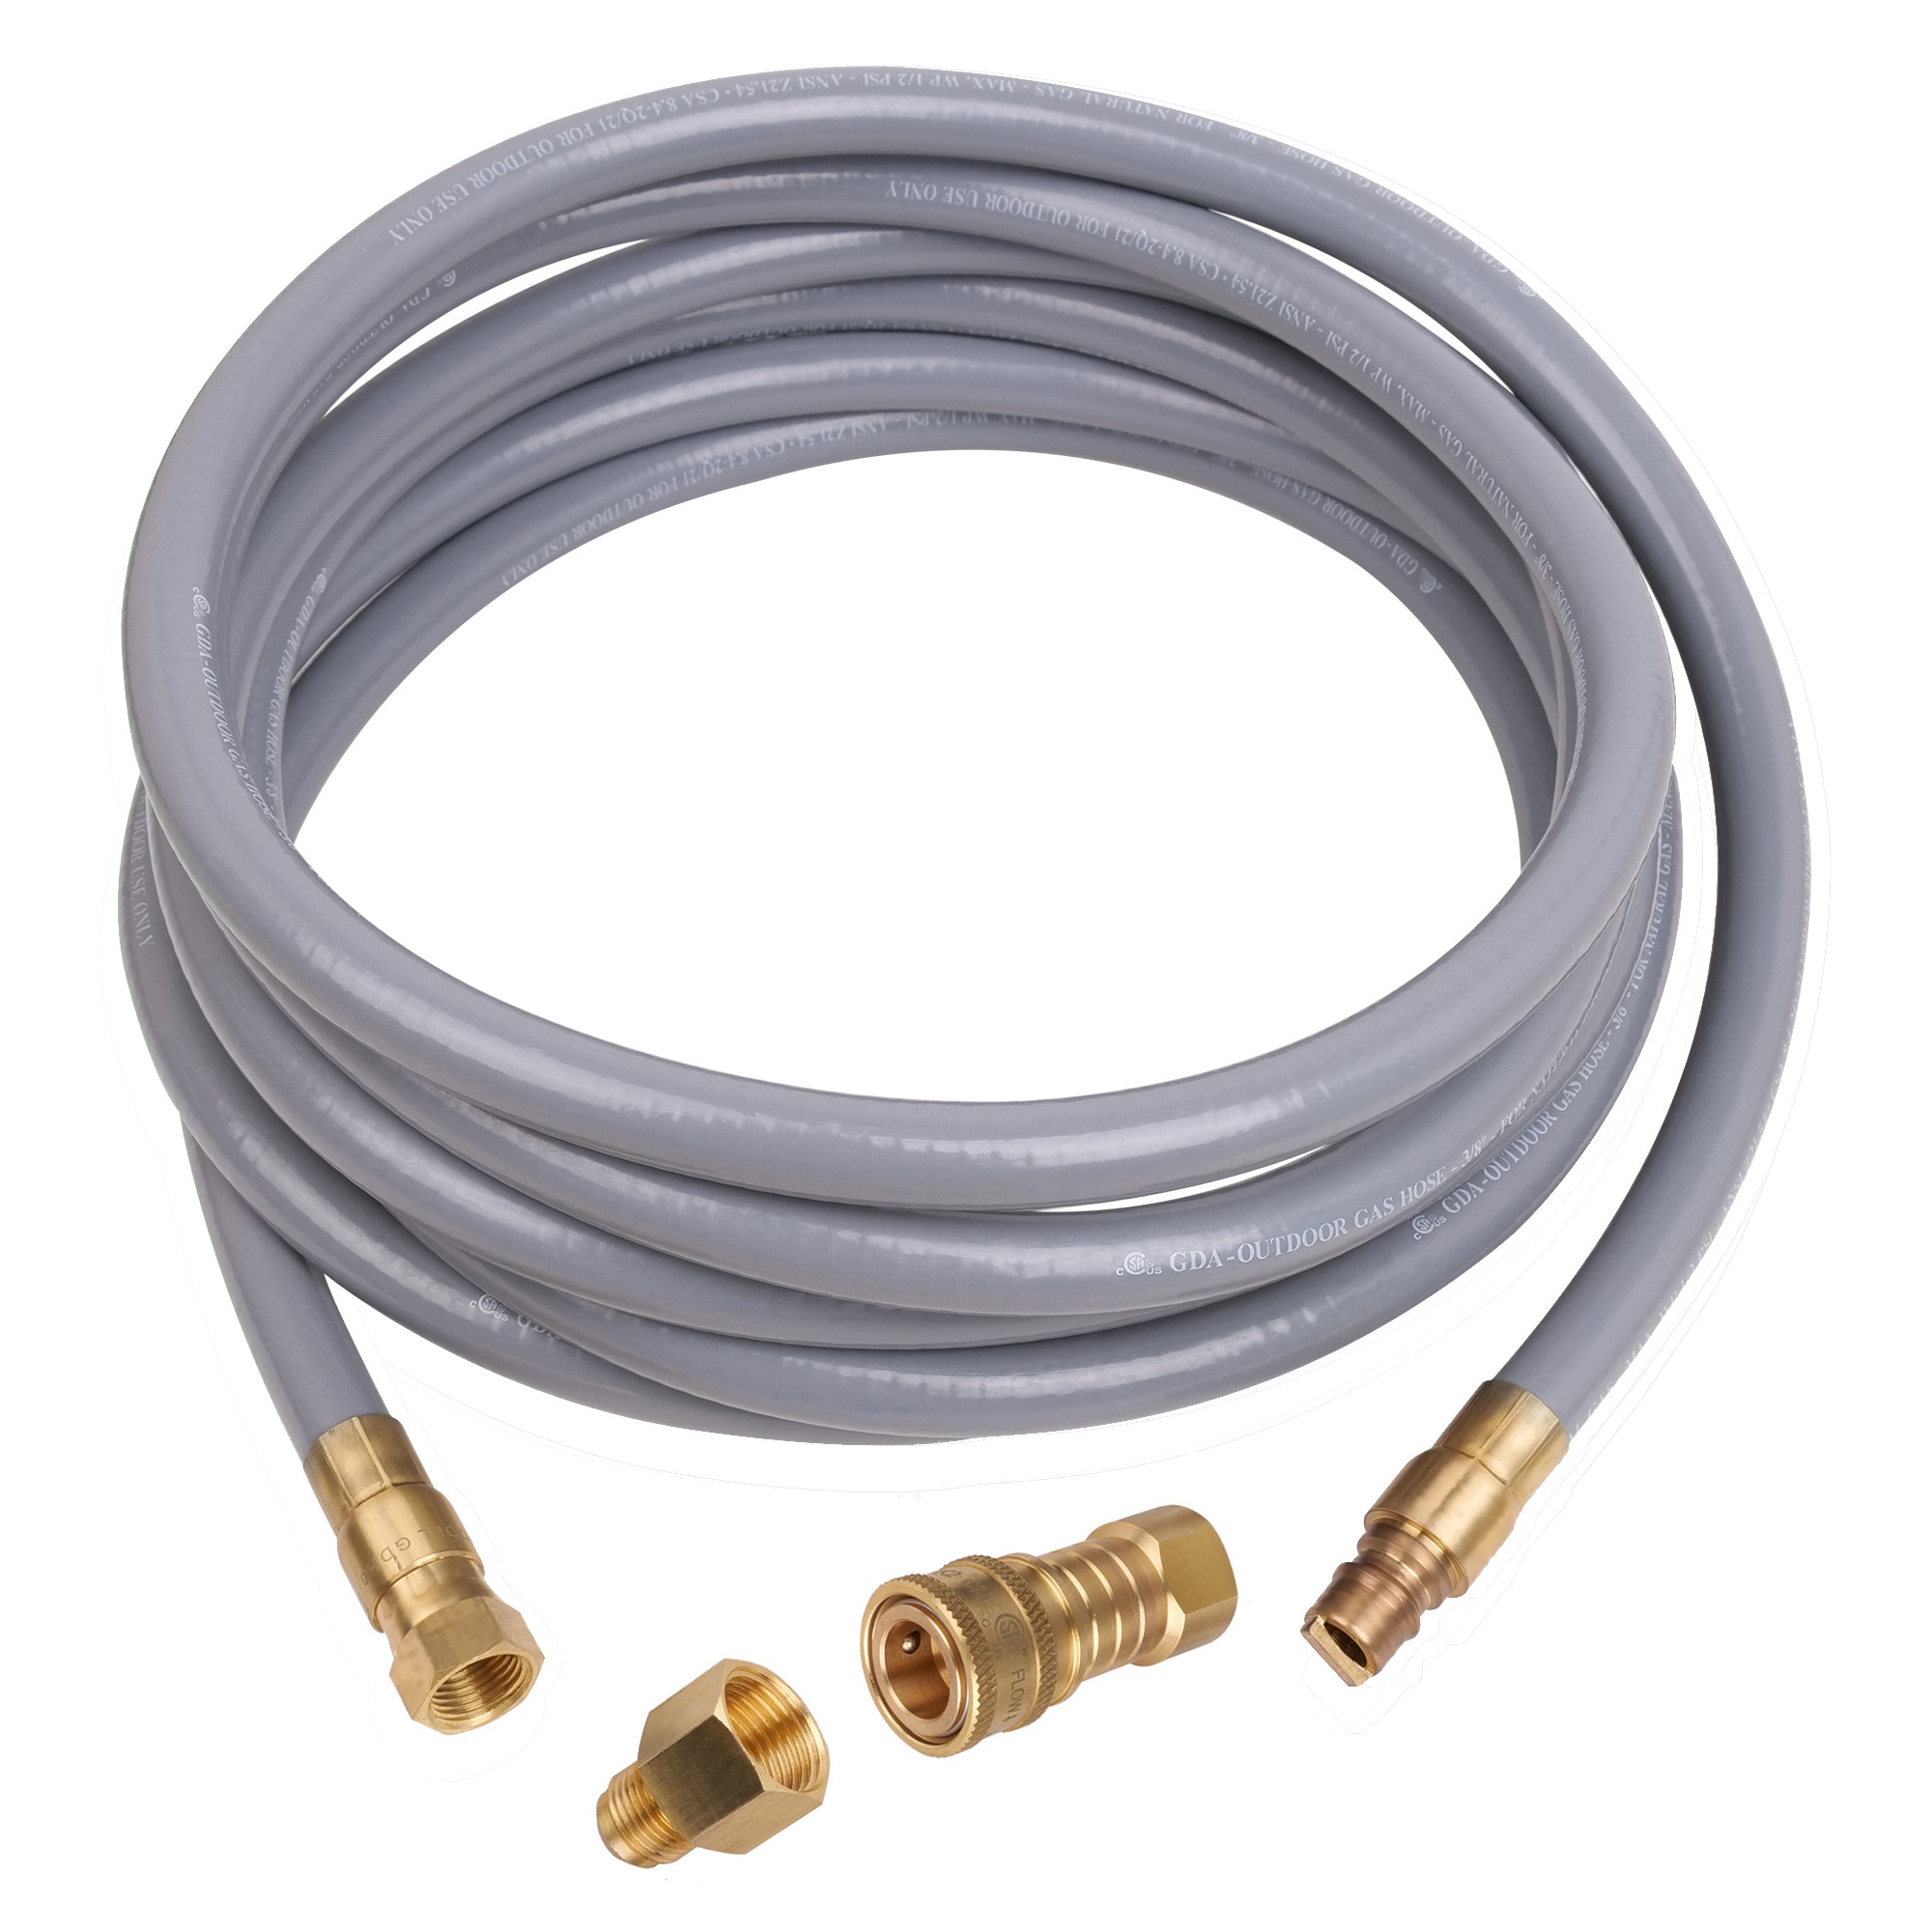 Empava 15 ft. x 3/8 in. Natural Gas Hose with Quick Connect Fittings